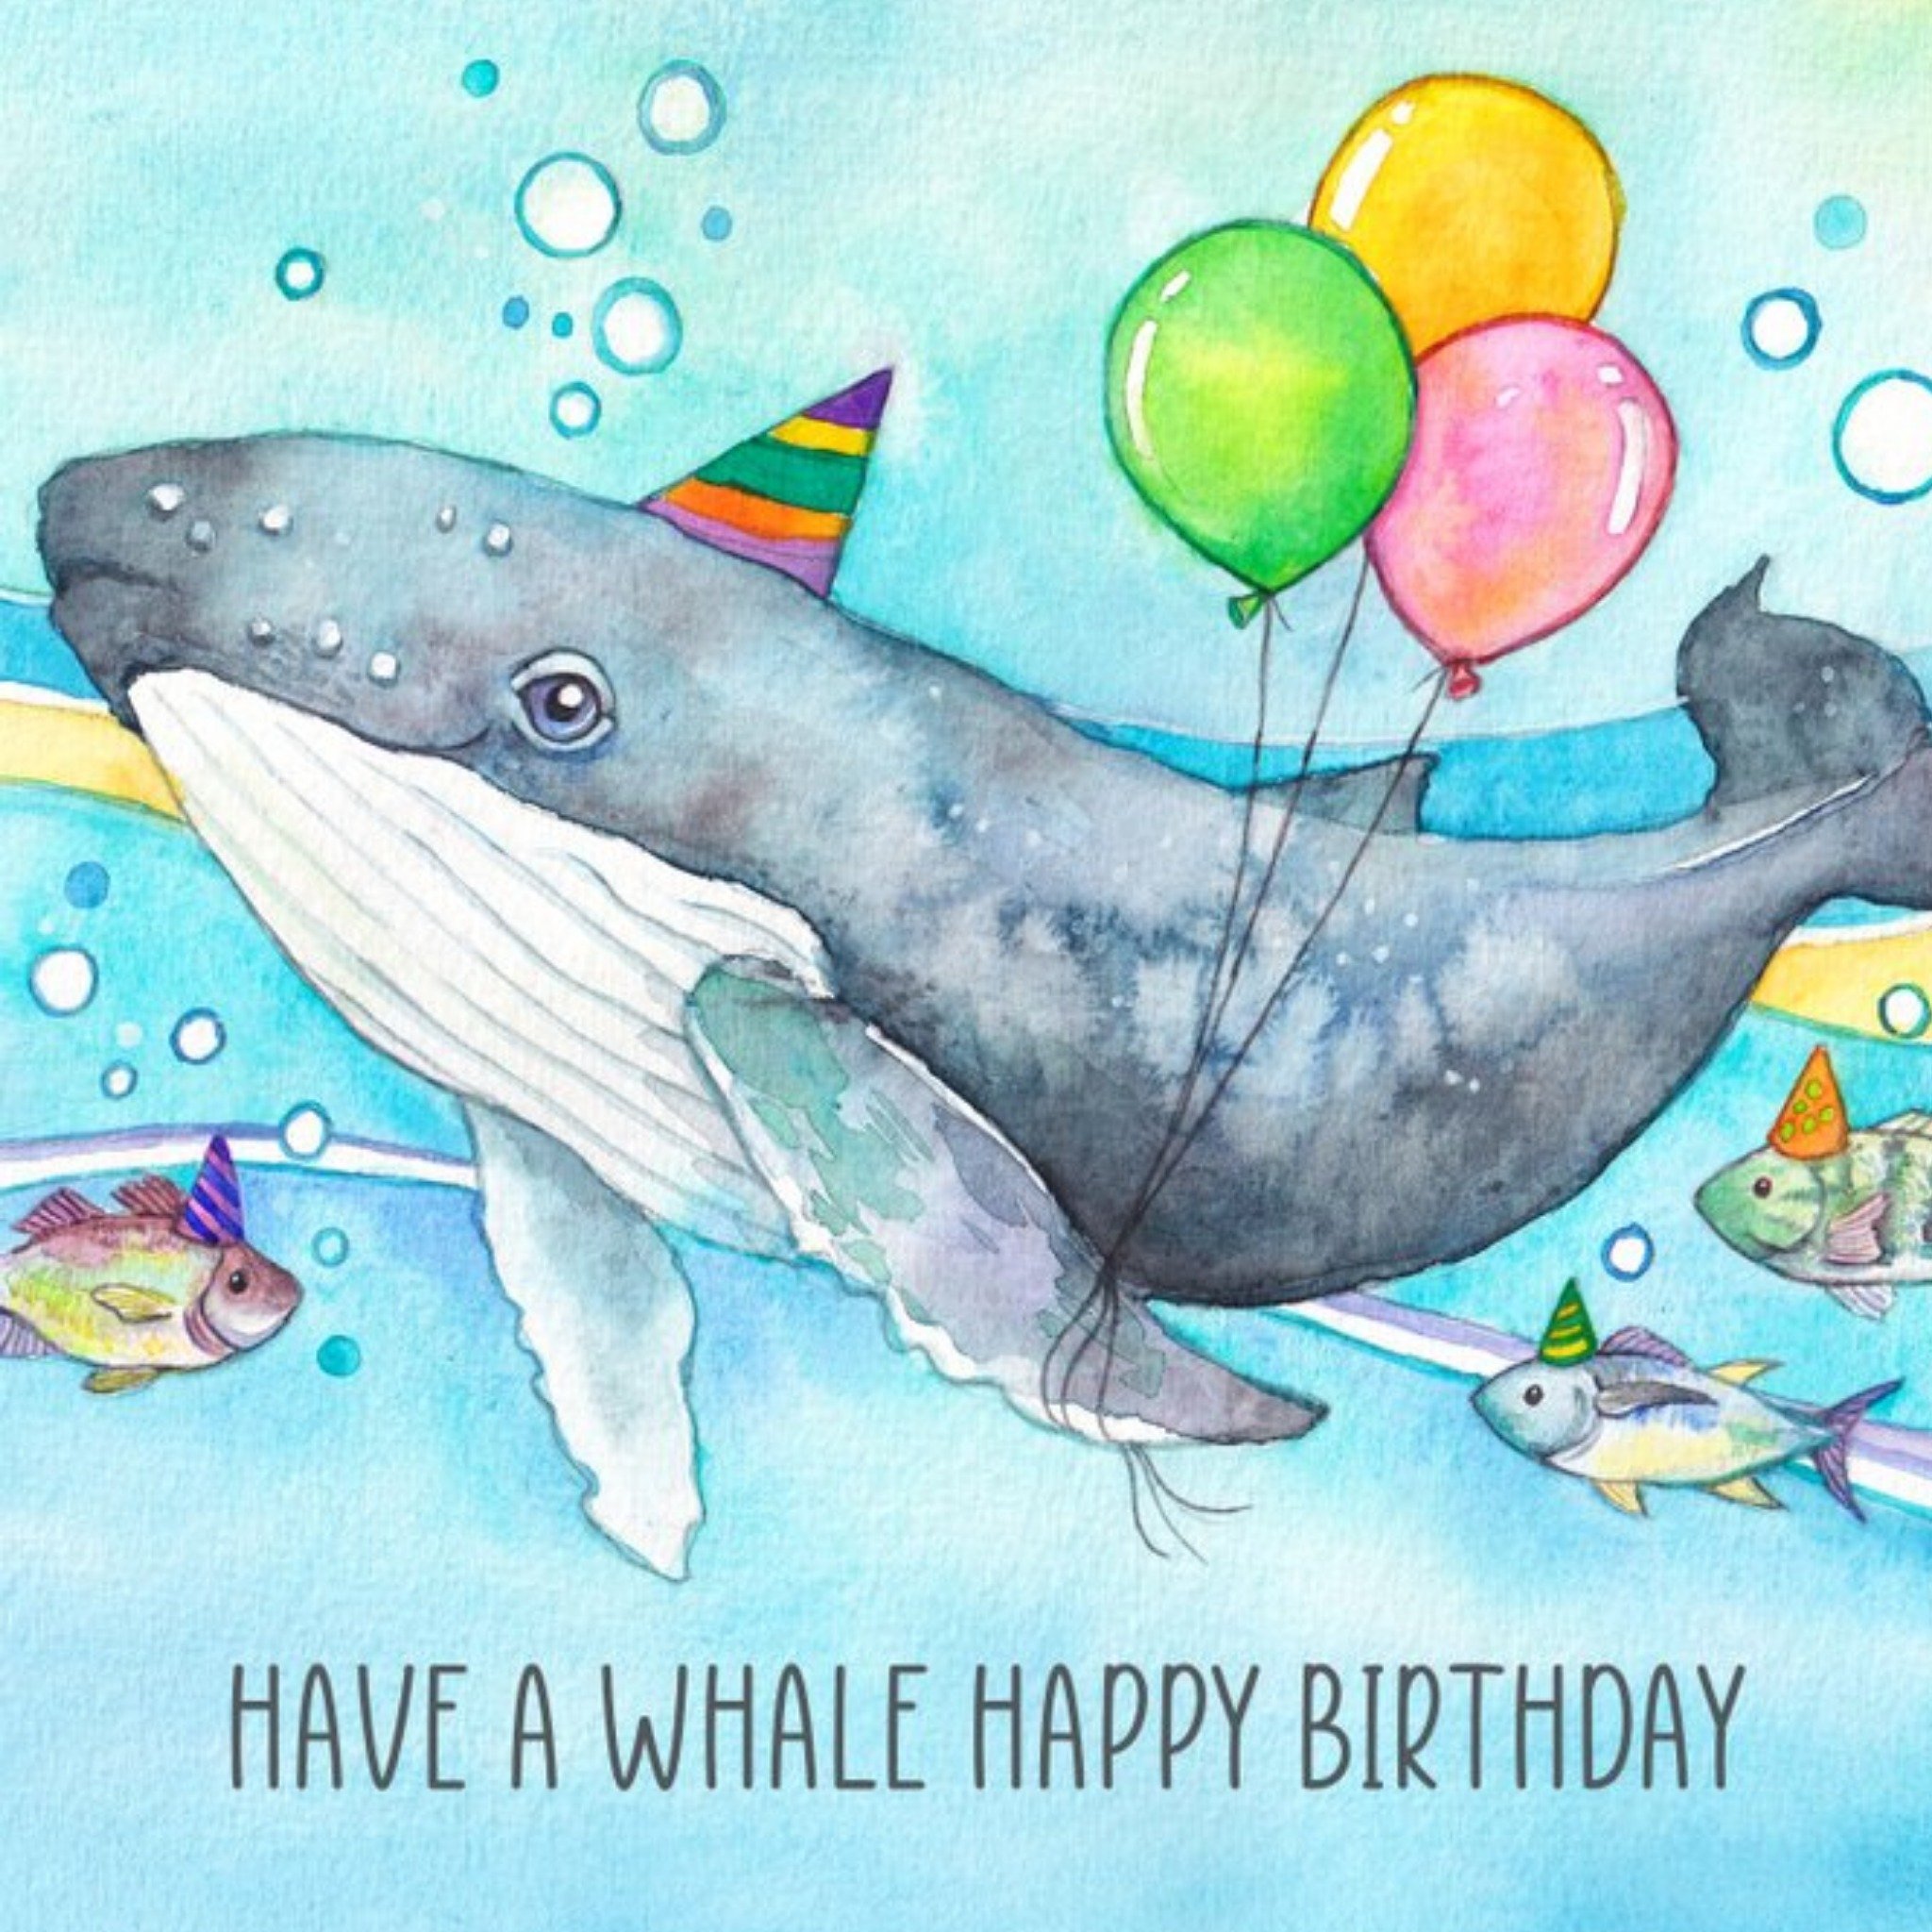 Moonpig Watercolour Illustrated Whale Birthday Card, Square